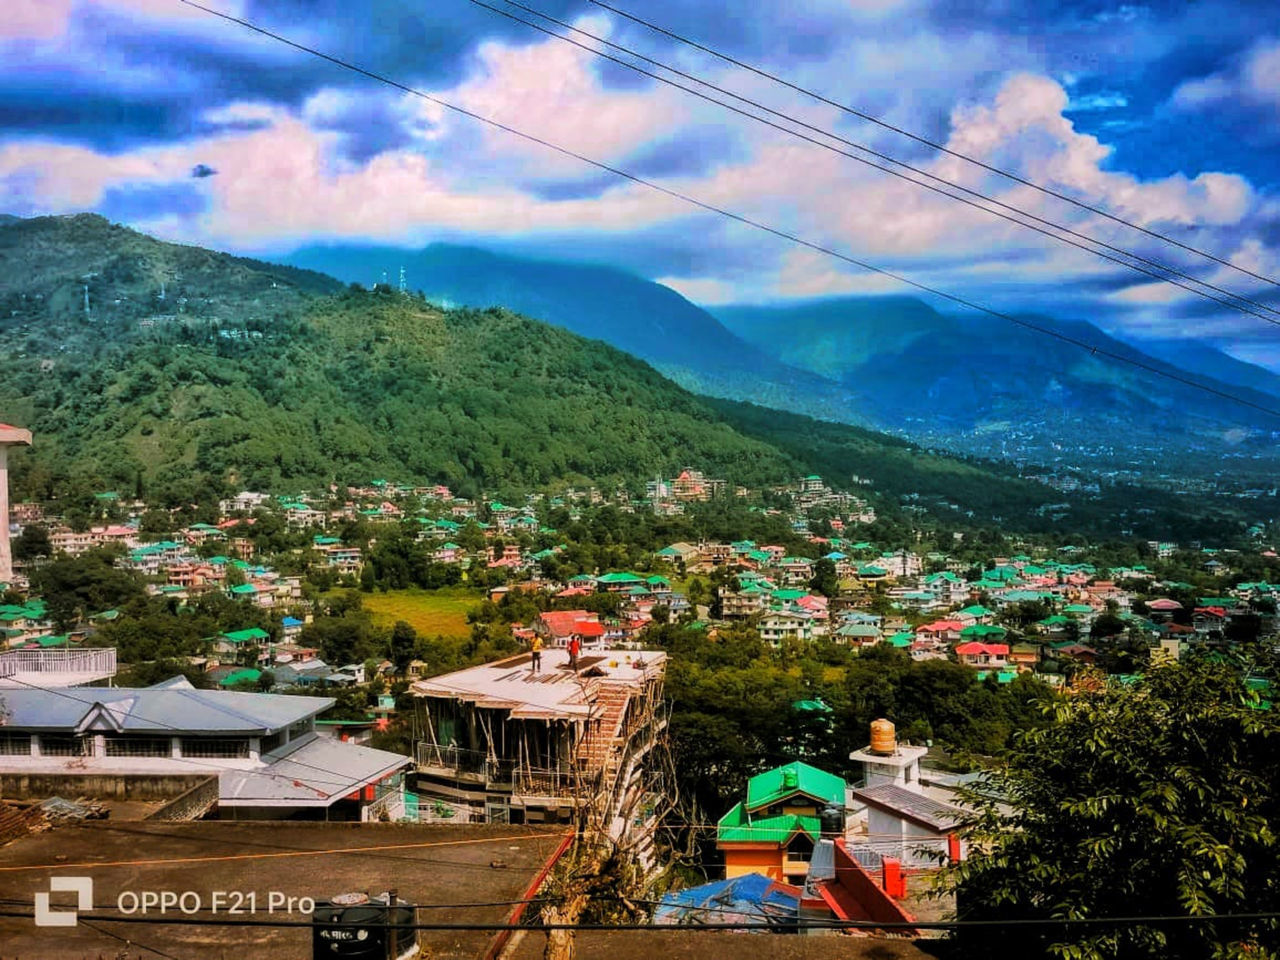 mountain, architecture, cloud, building exterior, nature, sky, built structure, building, town, plant, tree, city, landscape, house, environment, scenics - nature, mountain range, residential district, day, beauty in nature, transportation, outdoors, land, high angle view, no people, mode of transportation, travel destinations, village, travel, cityscape, cable